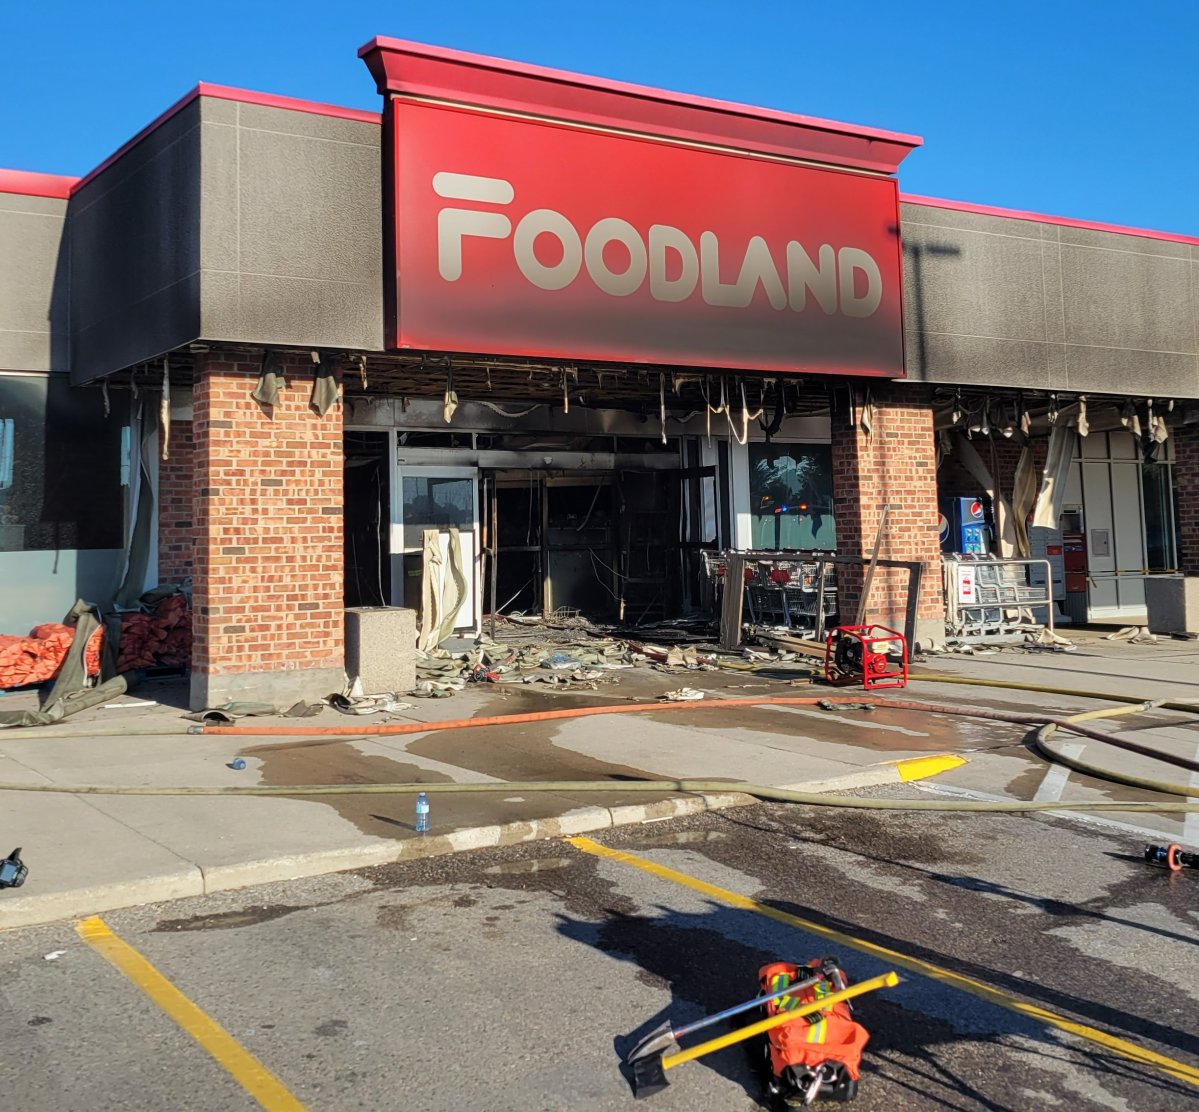 Dorchester Foodland after the fire was extinguished.